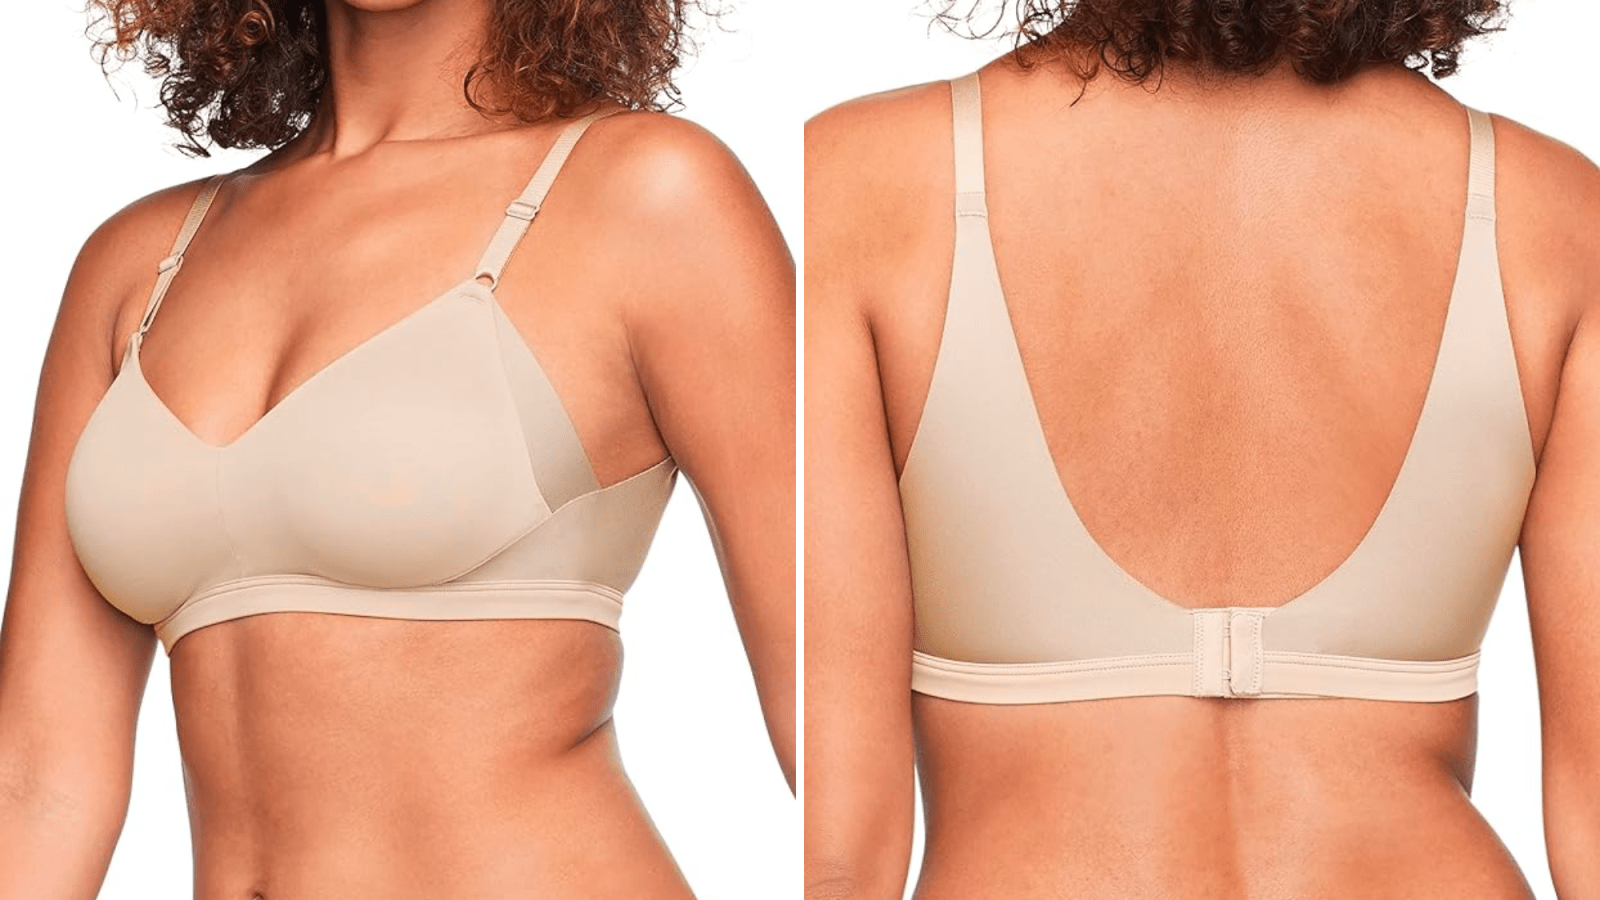 Easy sizing and comfortable side and back smoothing make the Beauty Back  Simple Sizing Wireless bra a favorite for wherever the day takes…